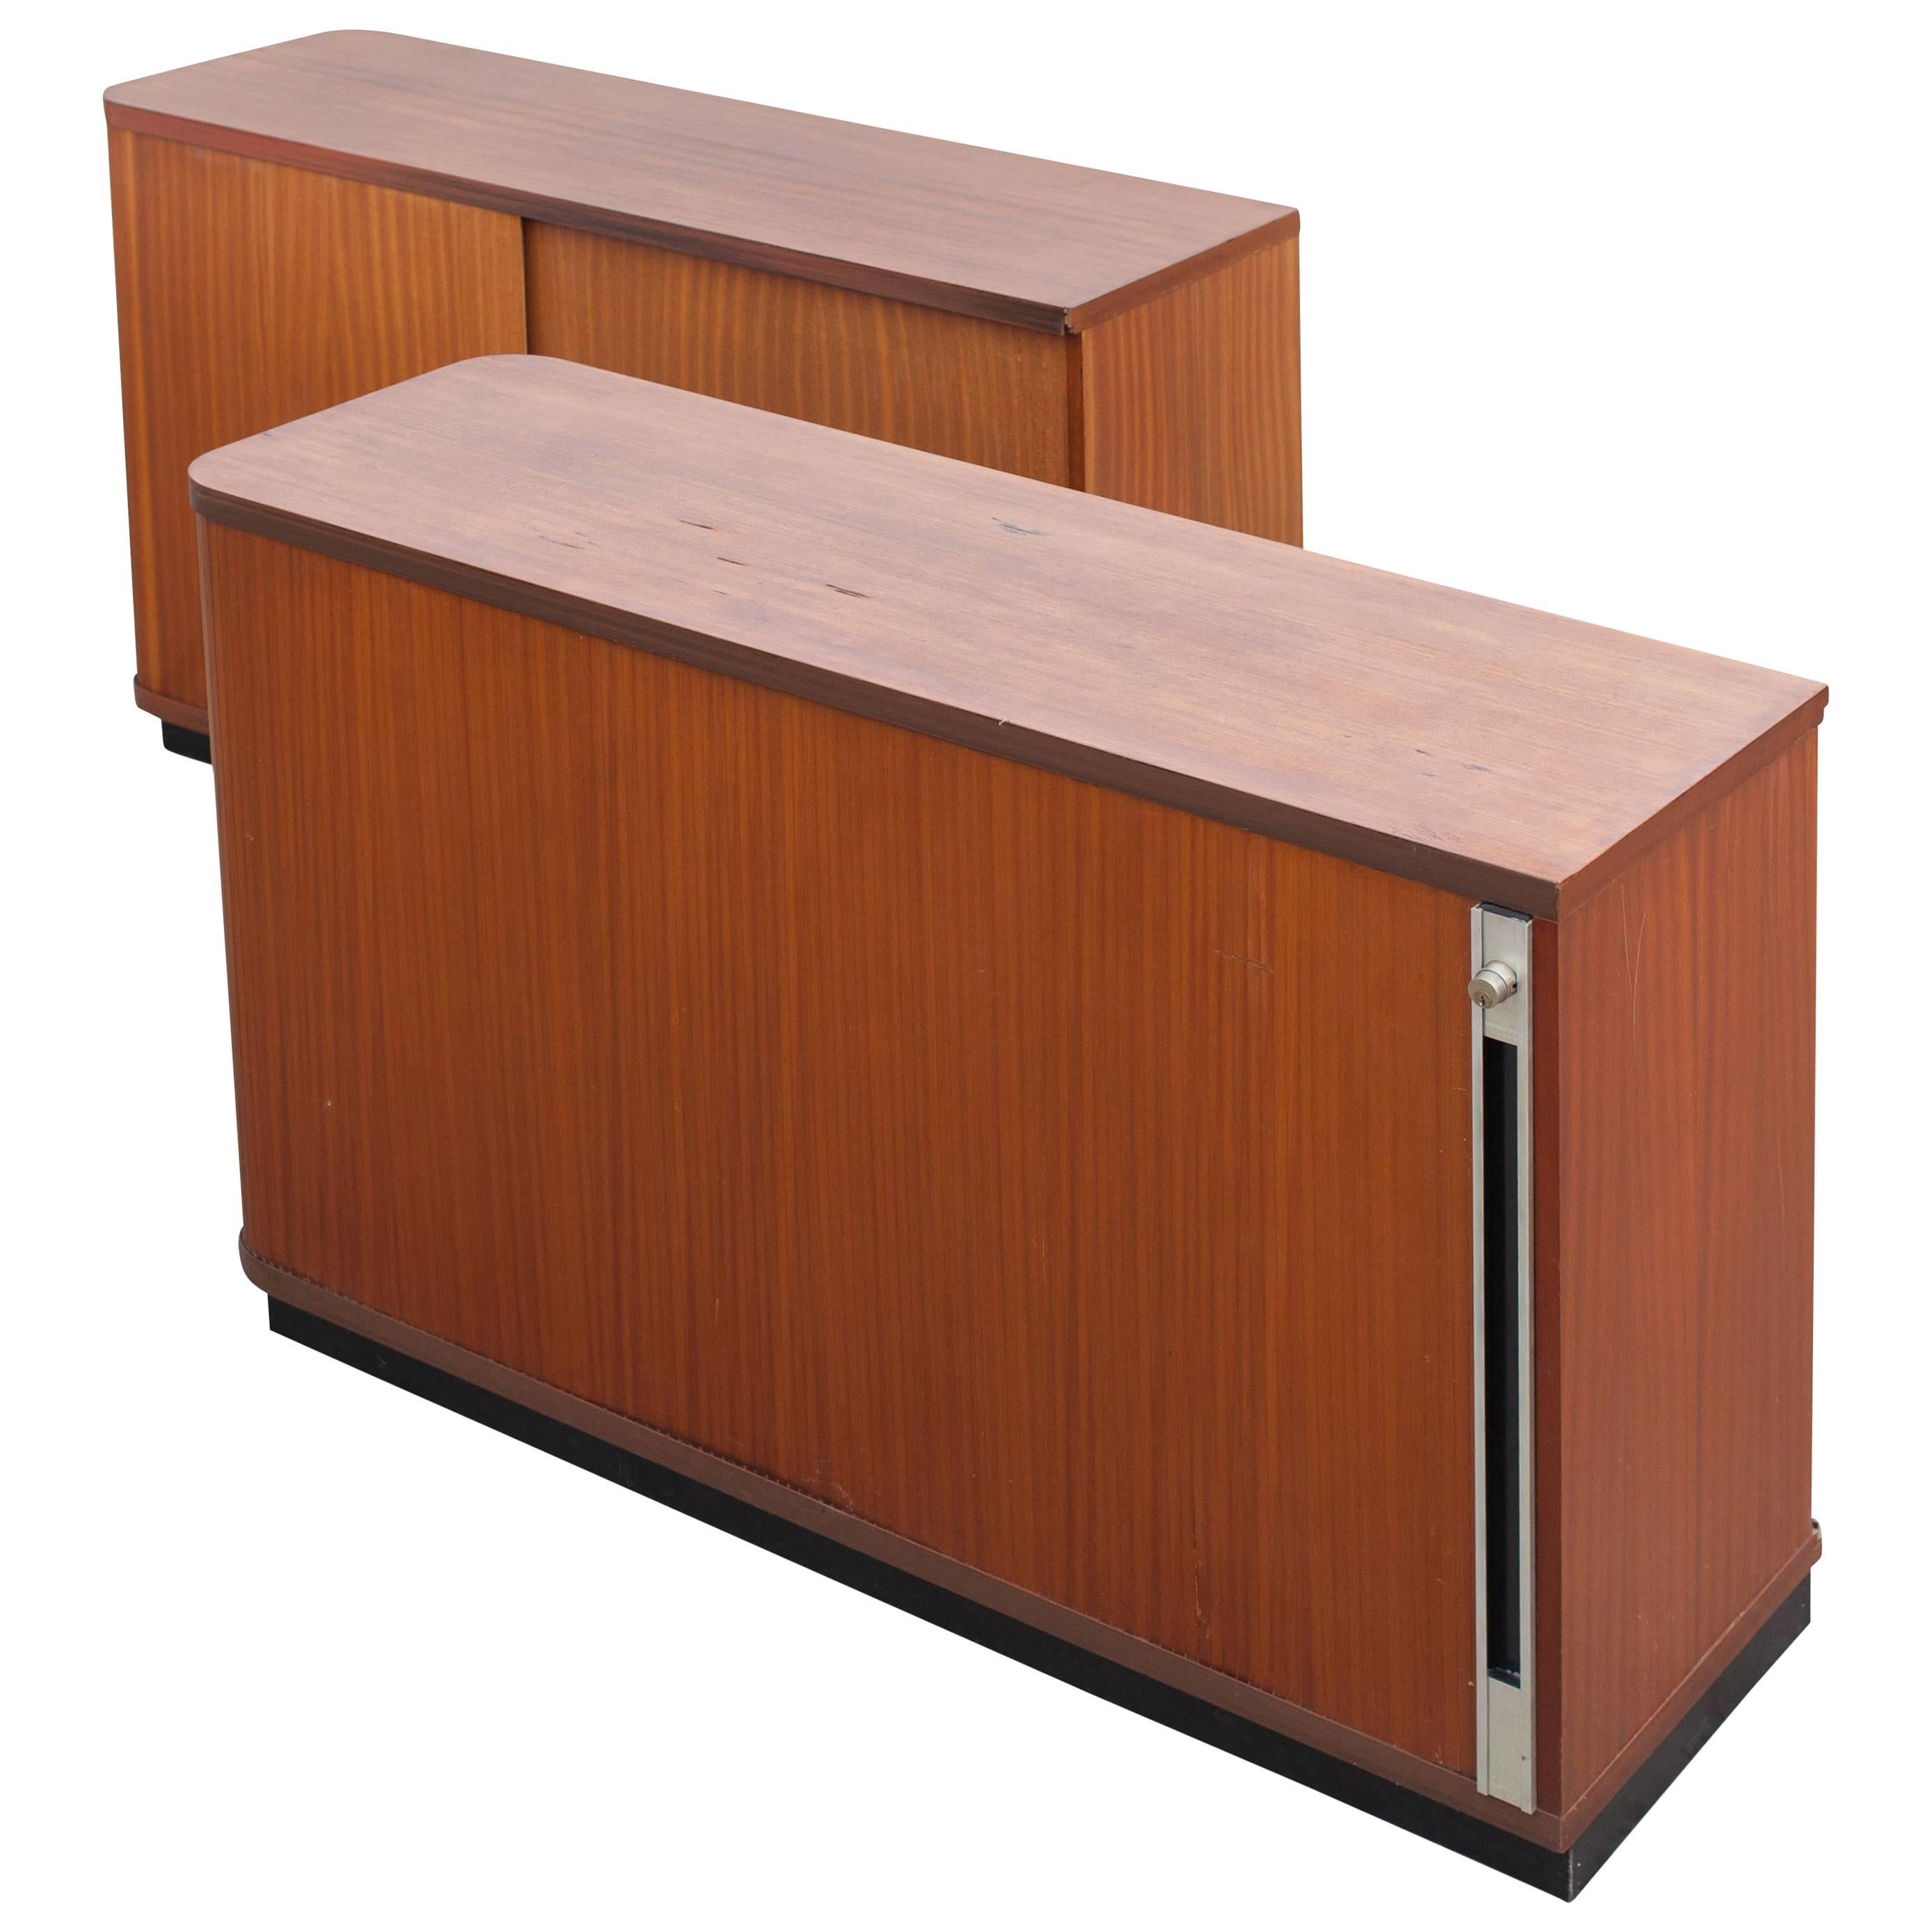 Florence Knoll style set of two teak office cabinets with tambour doors

Can be used as room dividers since the back are also finished in teak. 
The cabinets are equipped with sliding doors, several shelfs and locks.

Measures: W 125, D 41.5, H 80.5